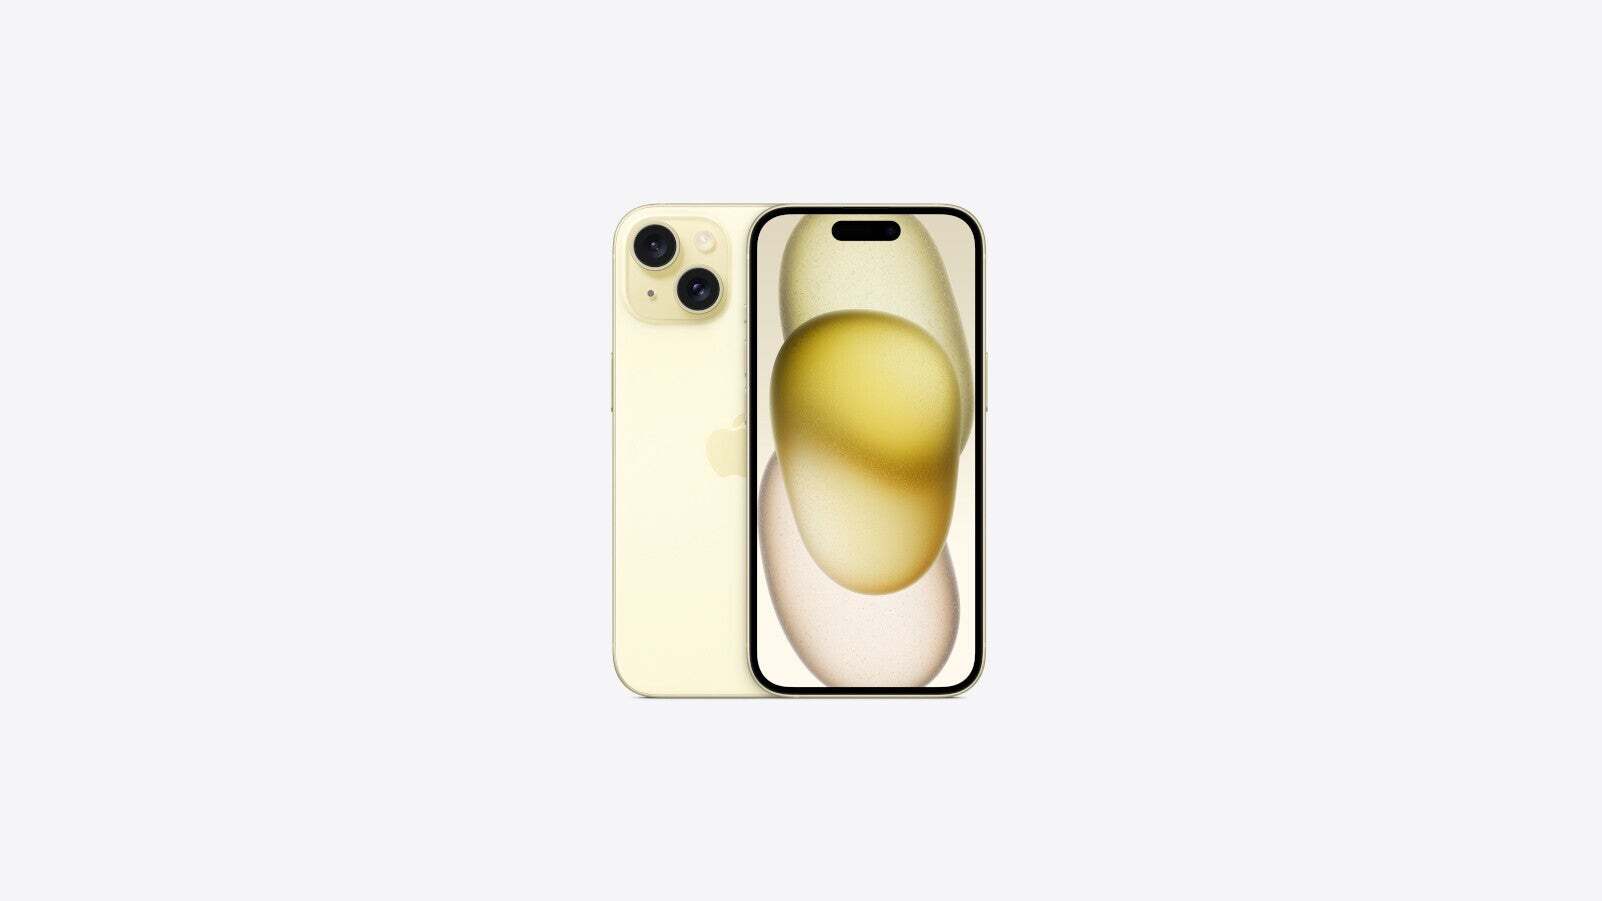 The iPhone 15 showcasing the Yellow color (Image Source - Apple) - iPhone 16 colors: all the rumored shades